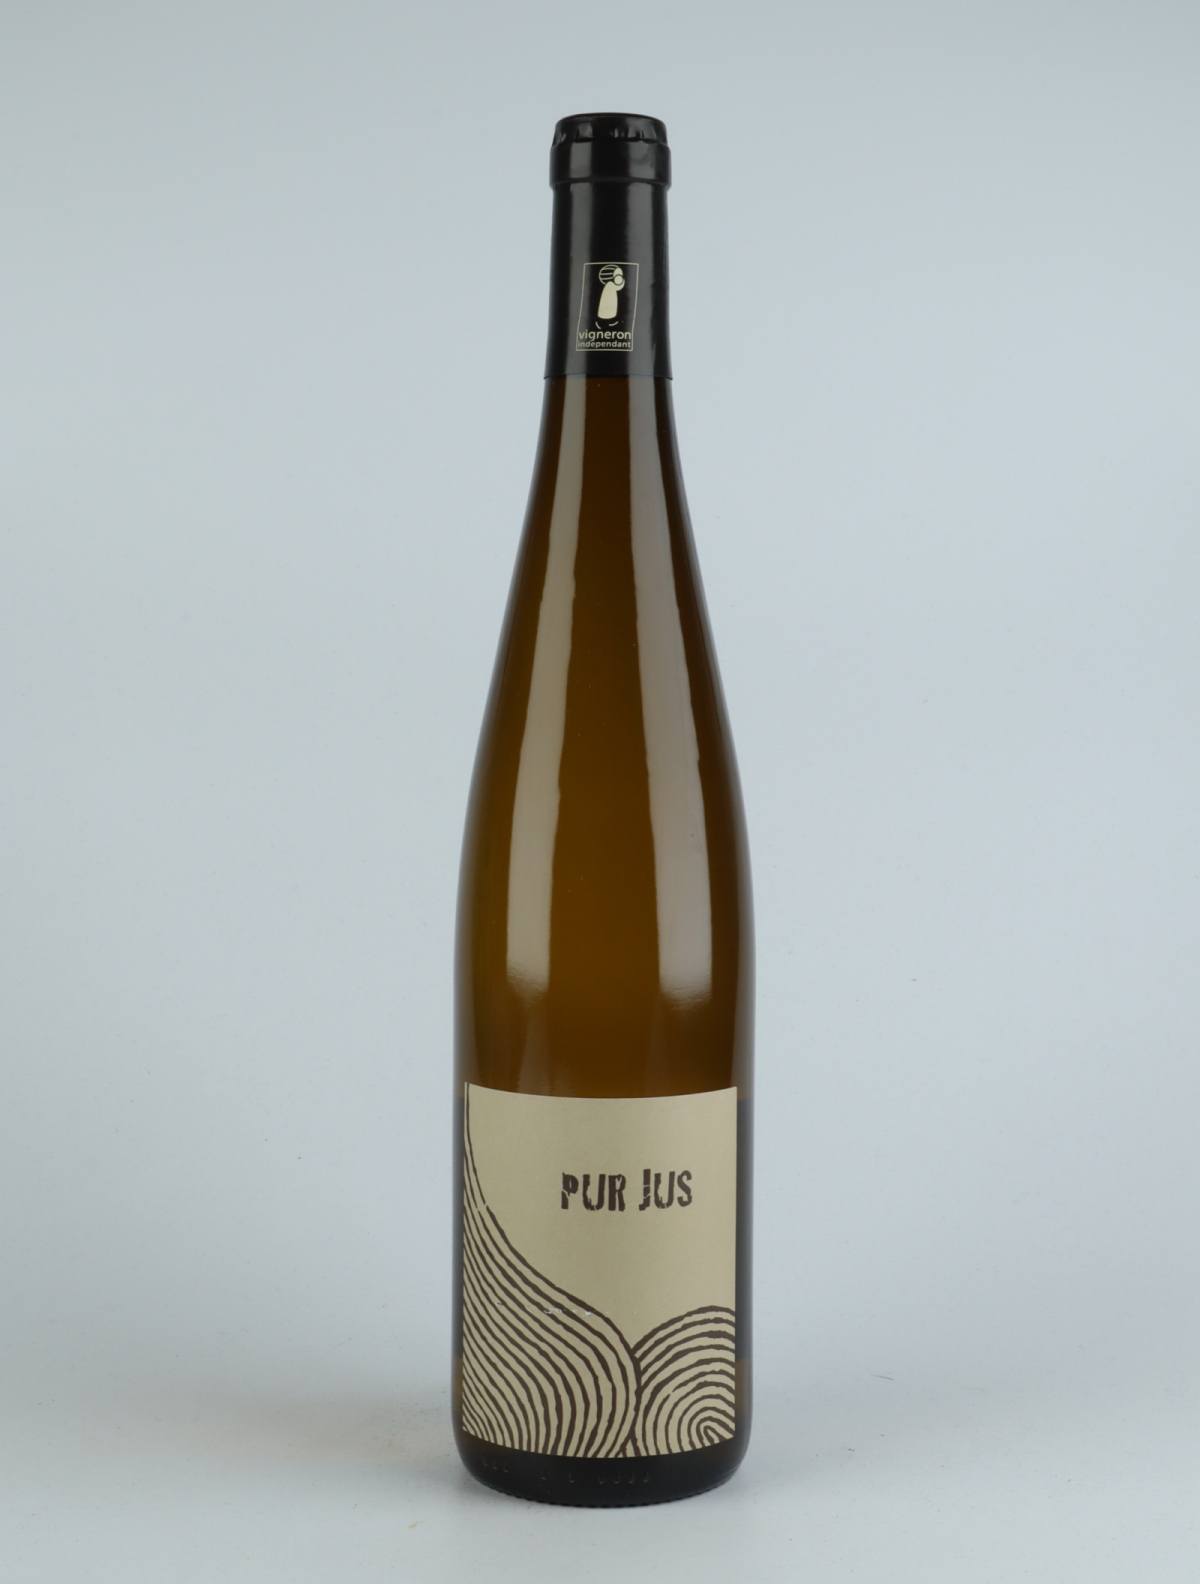 A bottle 2020 Pur Jus Blanc White wine from Ruhlmann Dirringer, Alsace in France